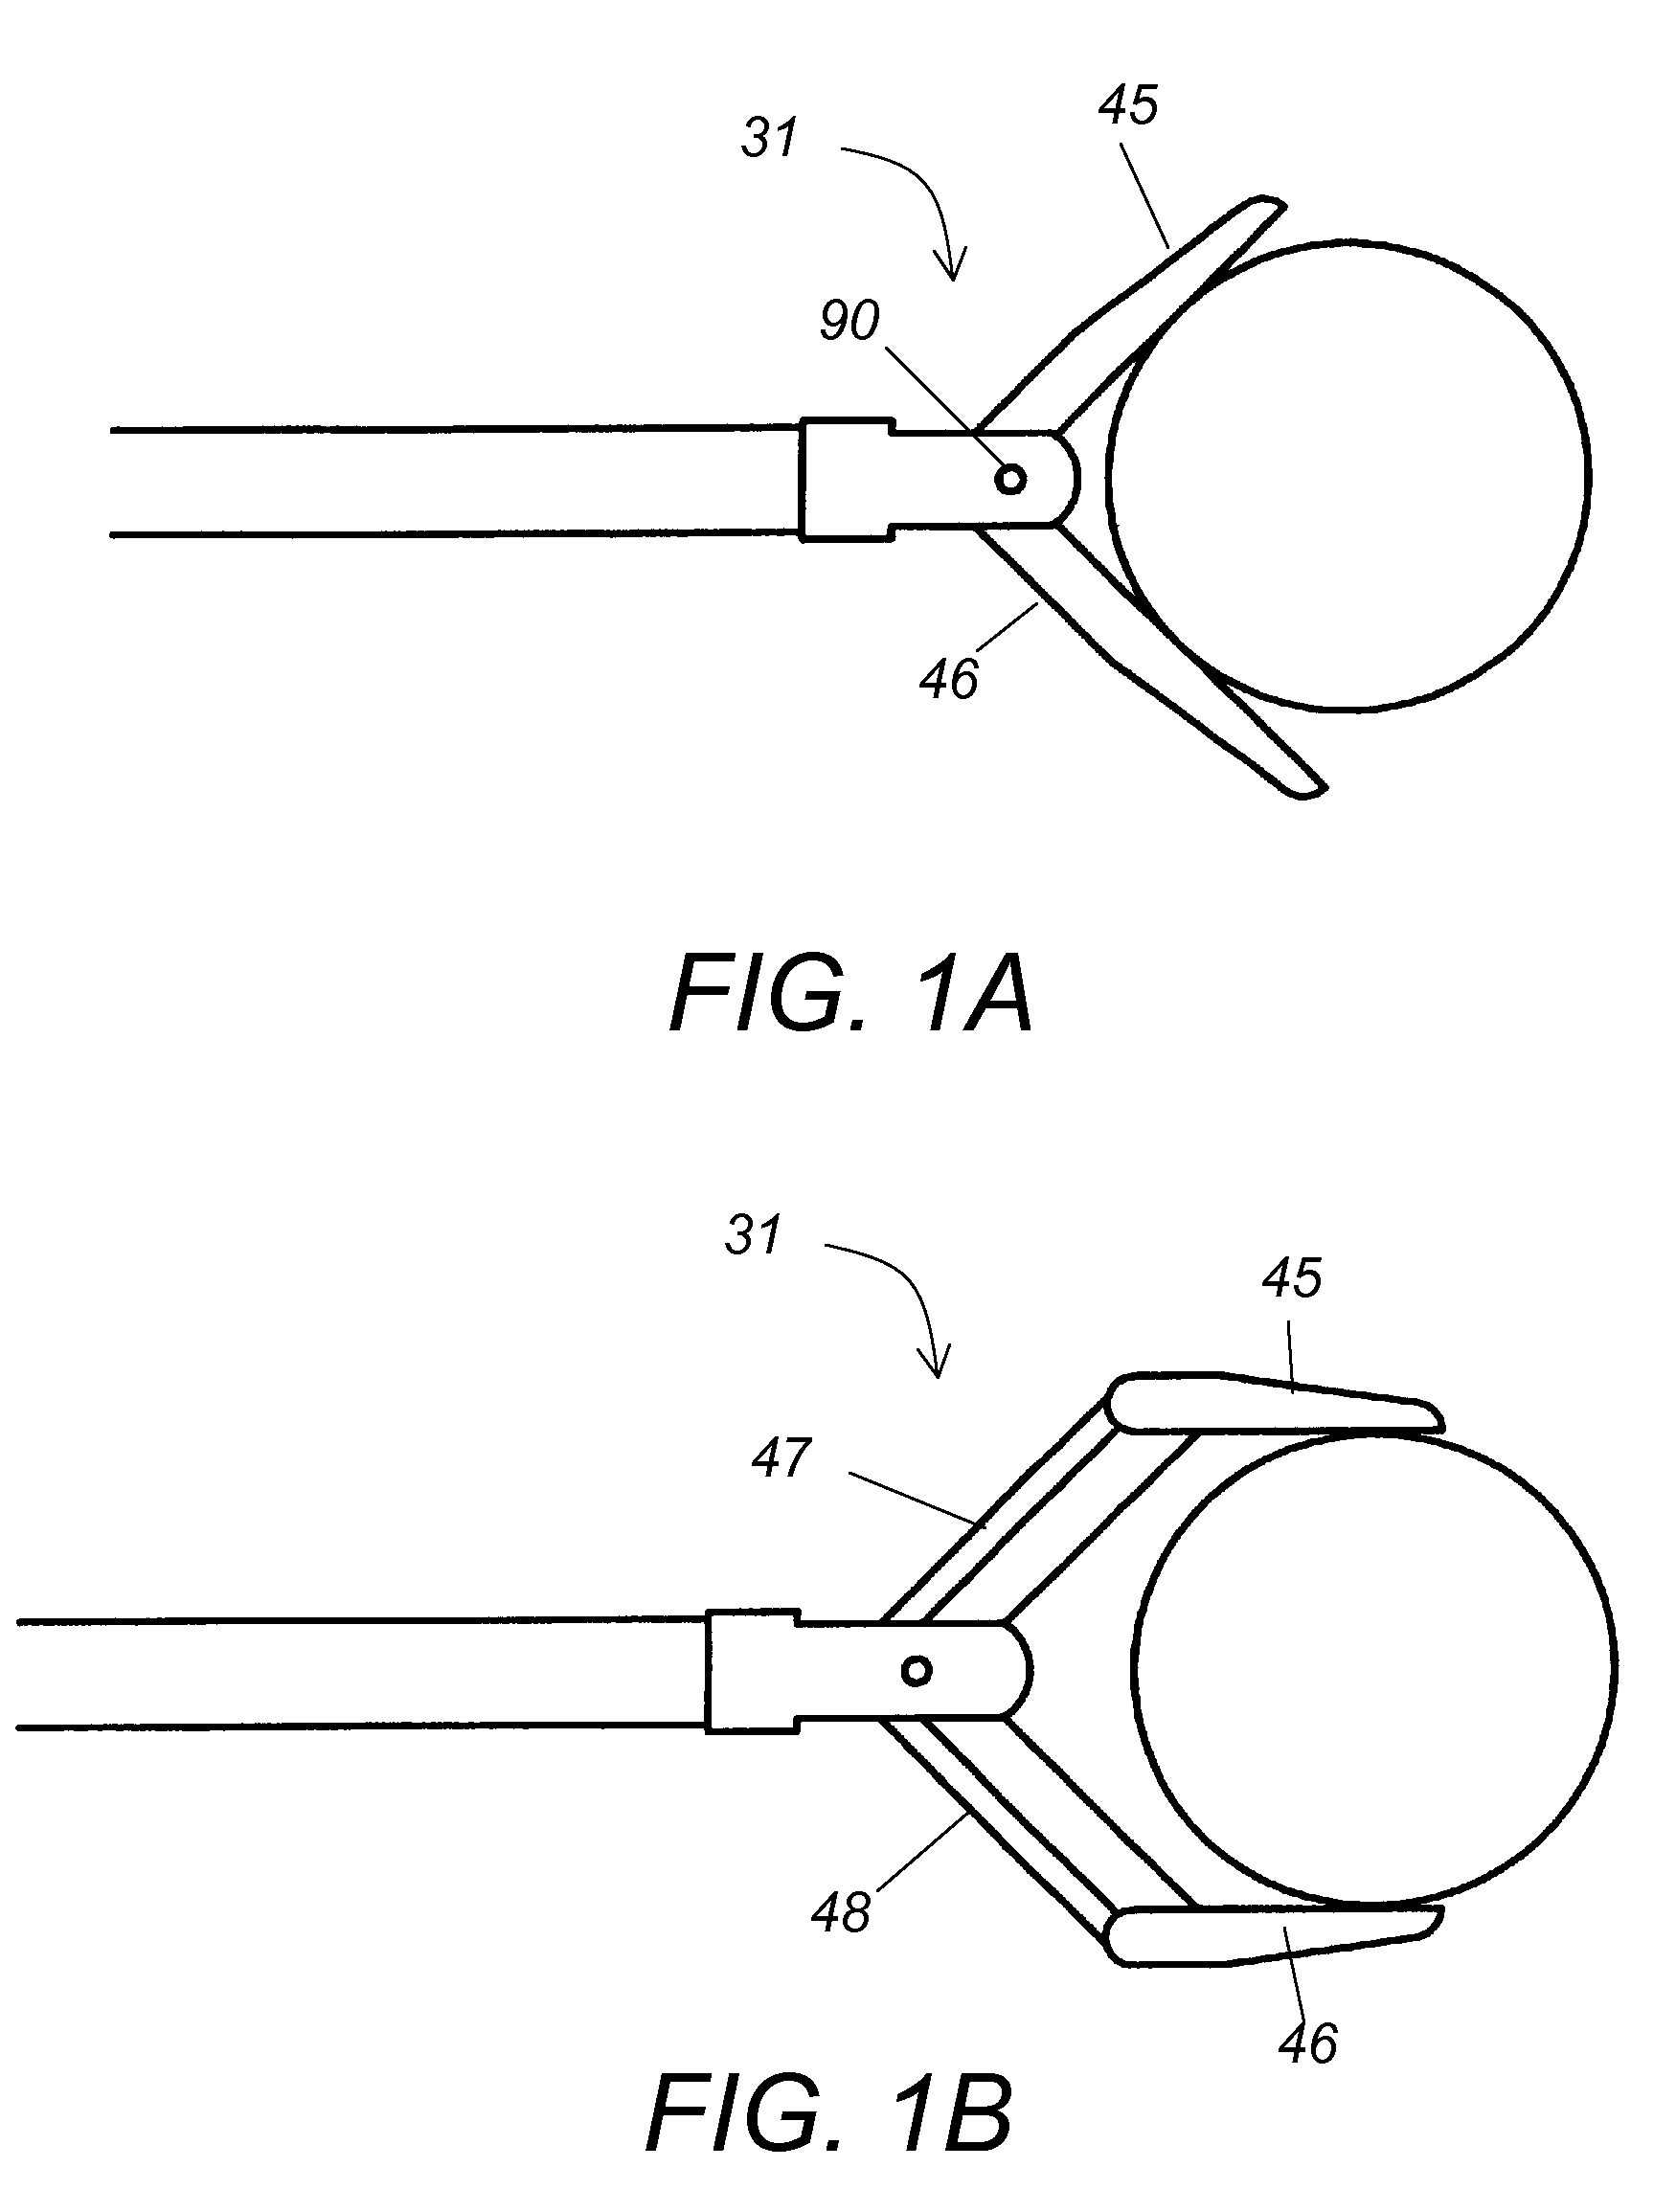 End effector mechanism for a surgical instrument